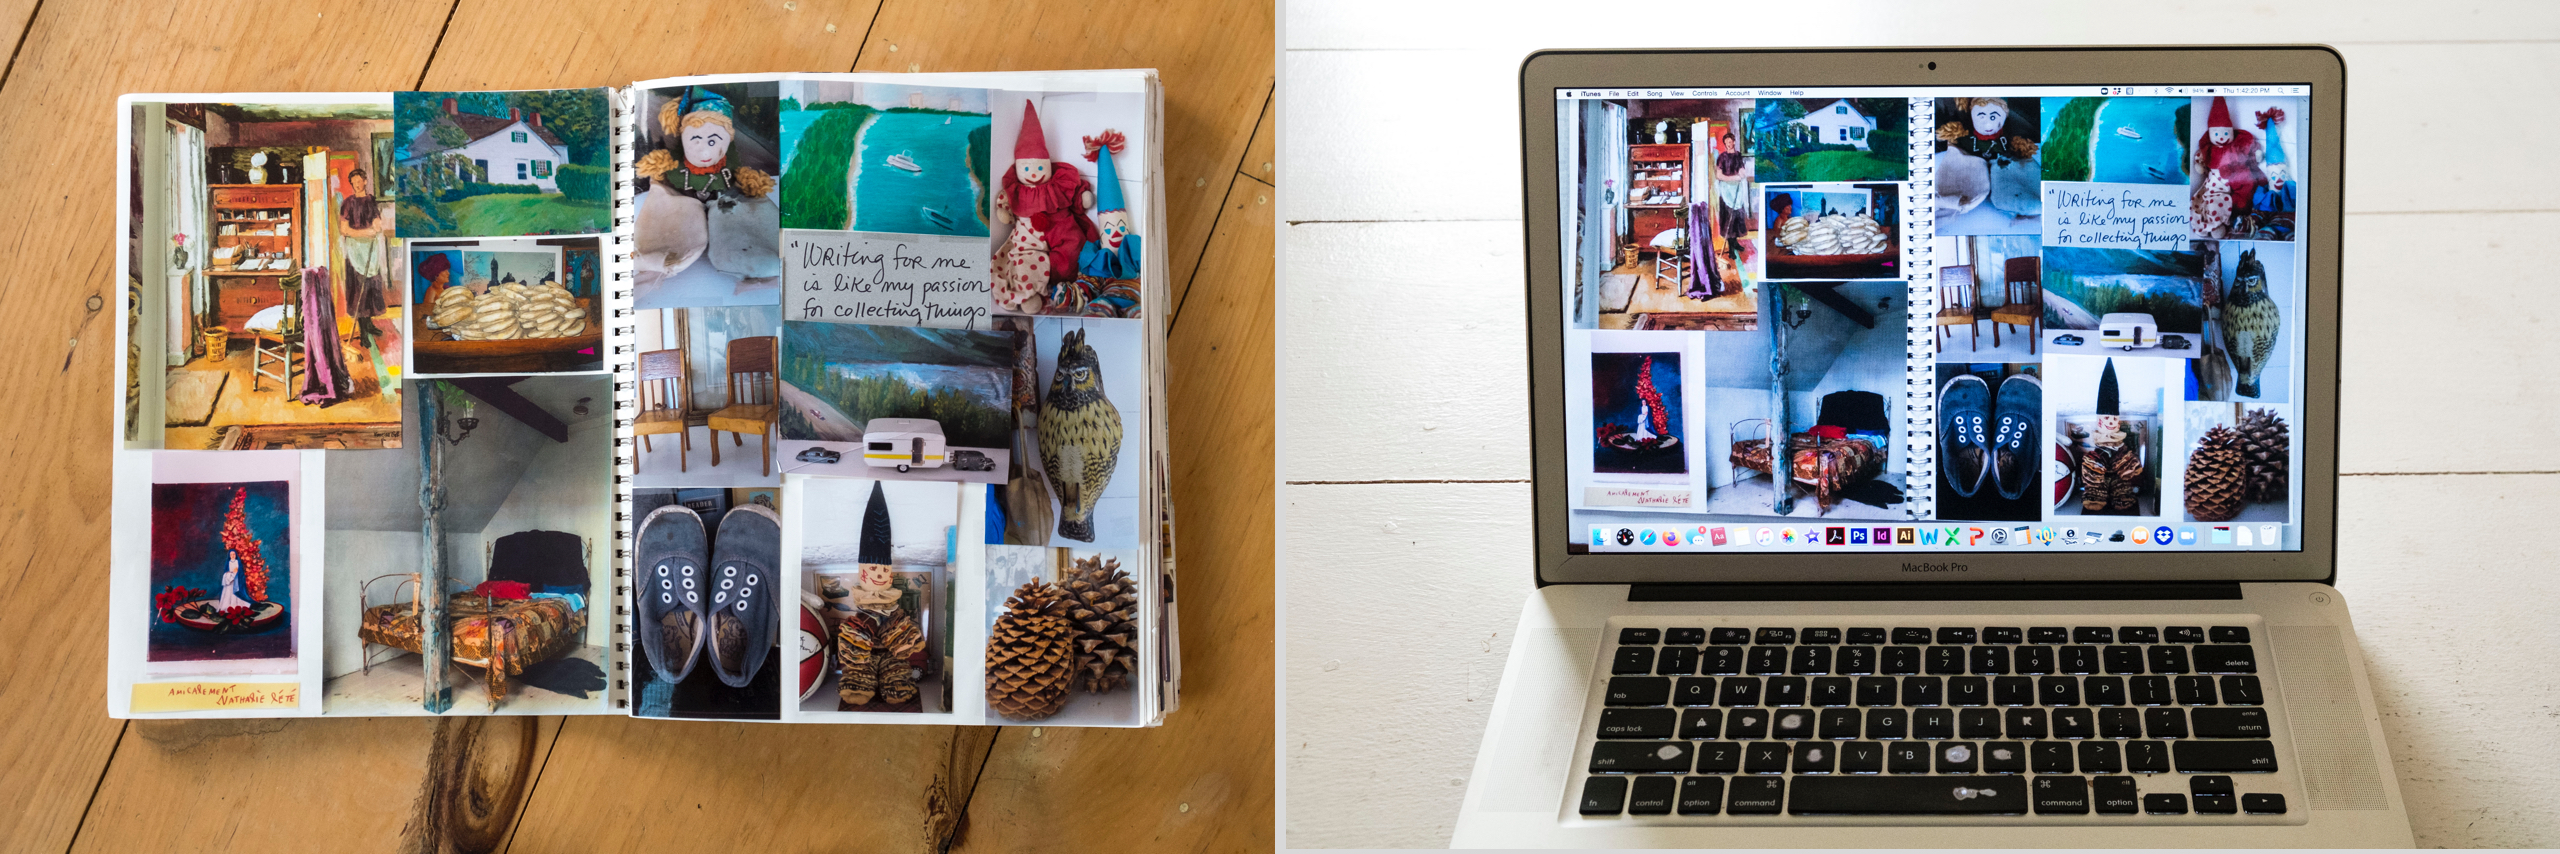 <em>Left:</em> A flea market collector’s scrapbook of found treasures collaged into an oversize scrapbook. (Guess whose?); <em>Right:</em> Create a digital collage and save it on your computer’s desktop. Personalize it with a handwritten message and change it often